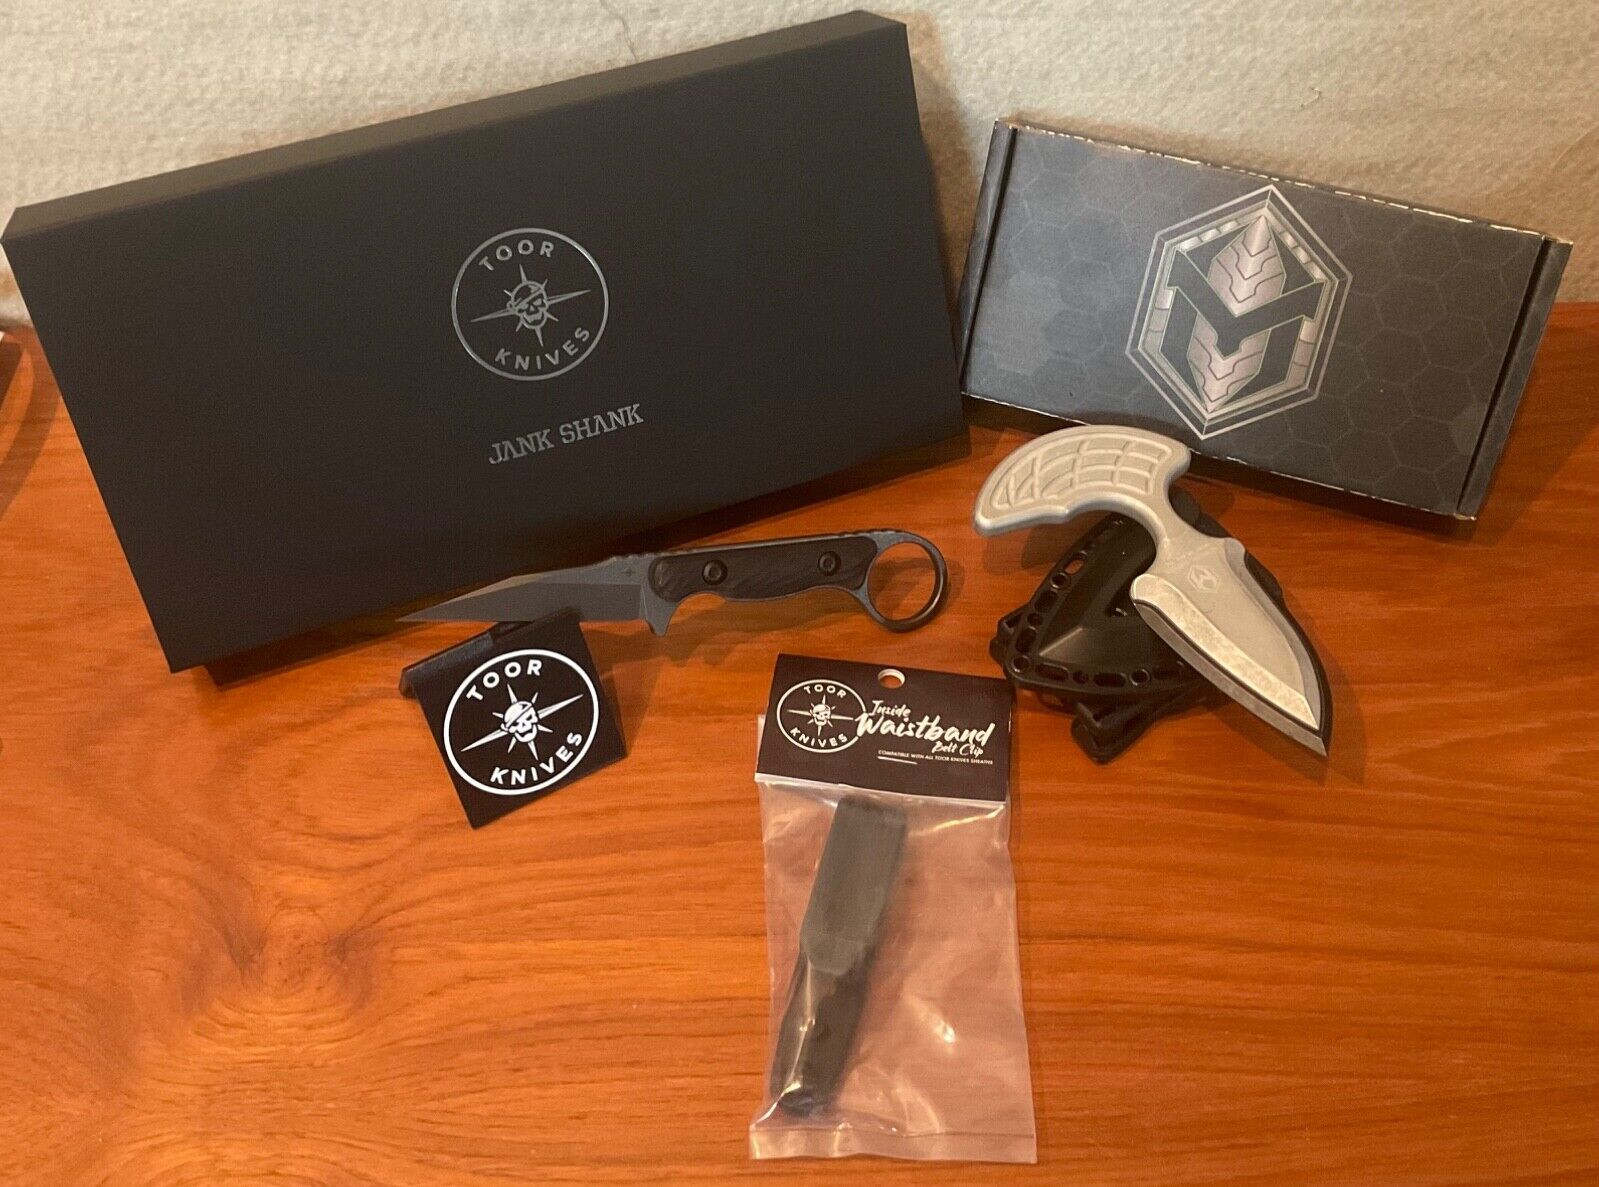 Toor Knives Jank Shank Outlaw & Heretic Sleight Stonewash - IWB CLIP